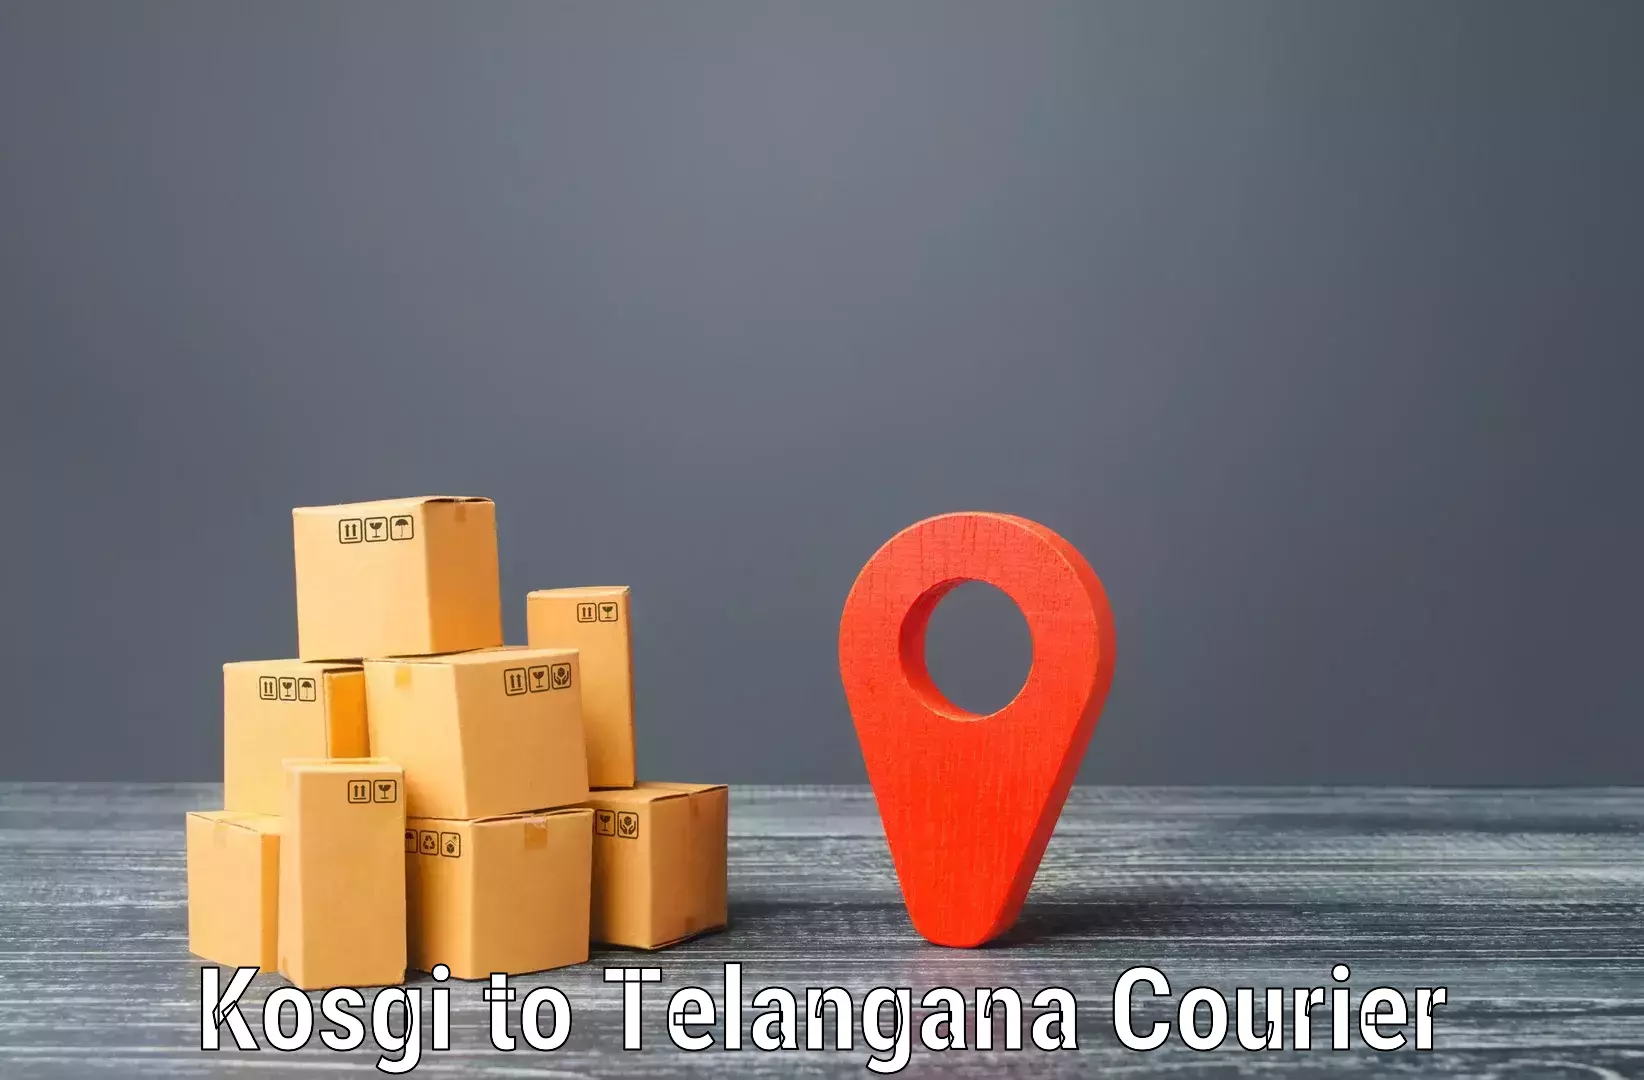 Supply chain delivery Kosgi to Secunderabad